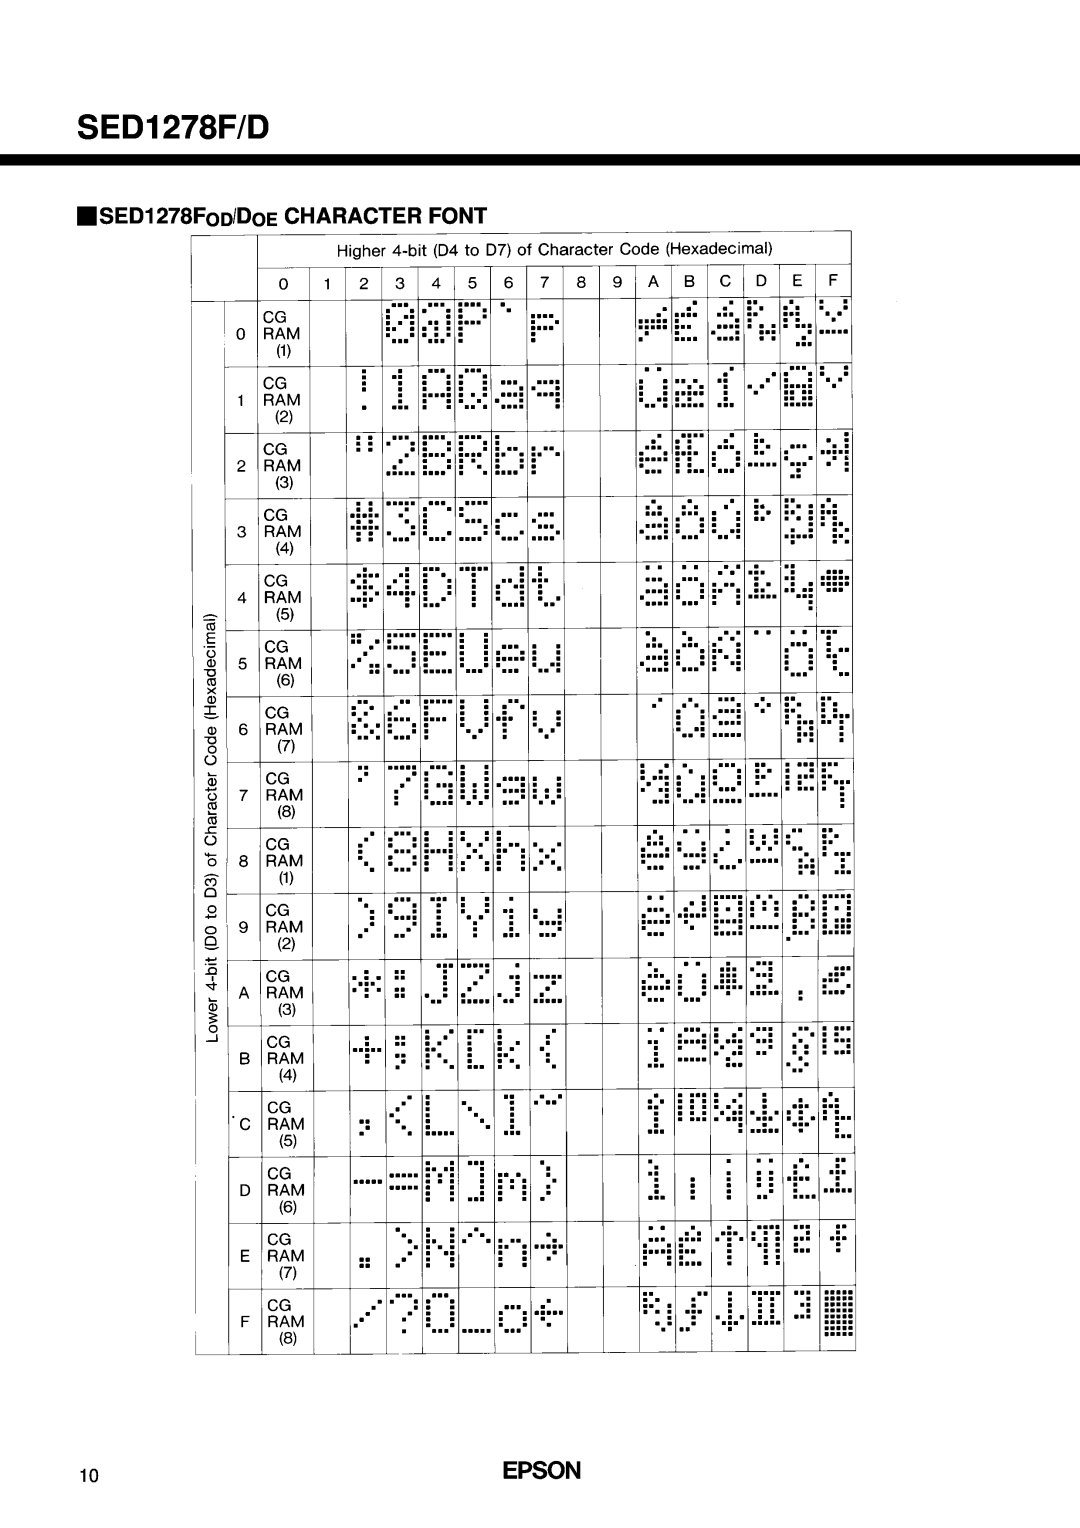 Epson SED1278F/D manual SED1278FOD/DOE CHARACTER FONT 